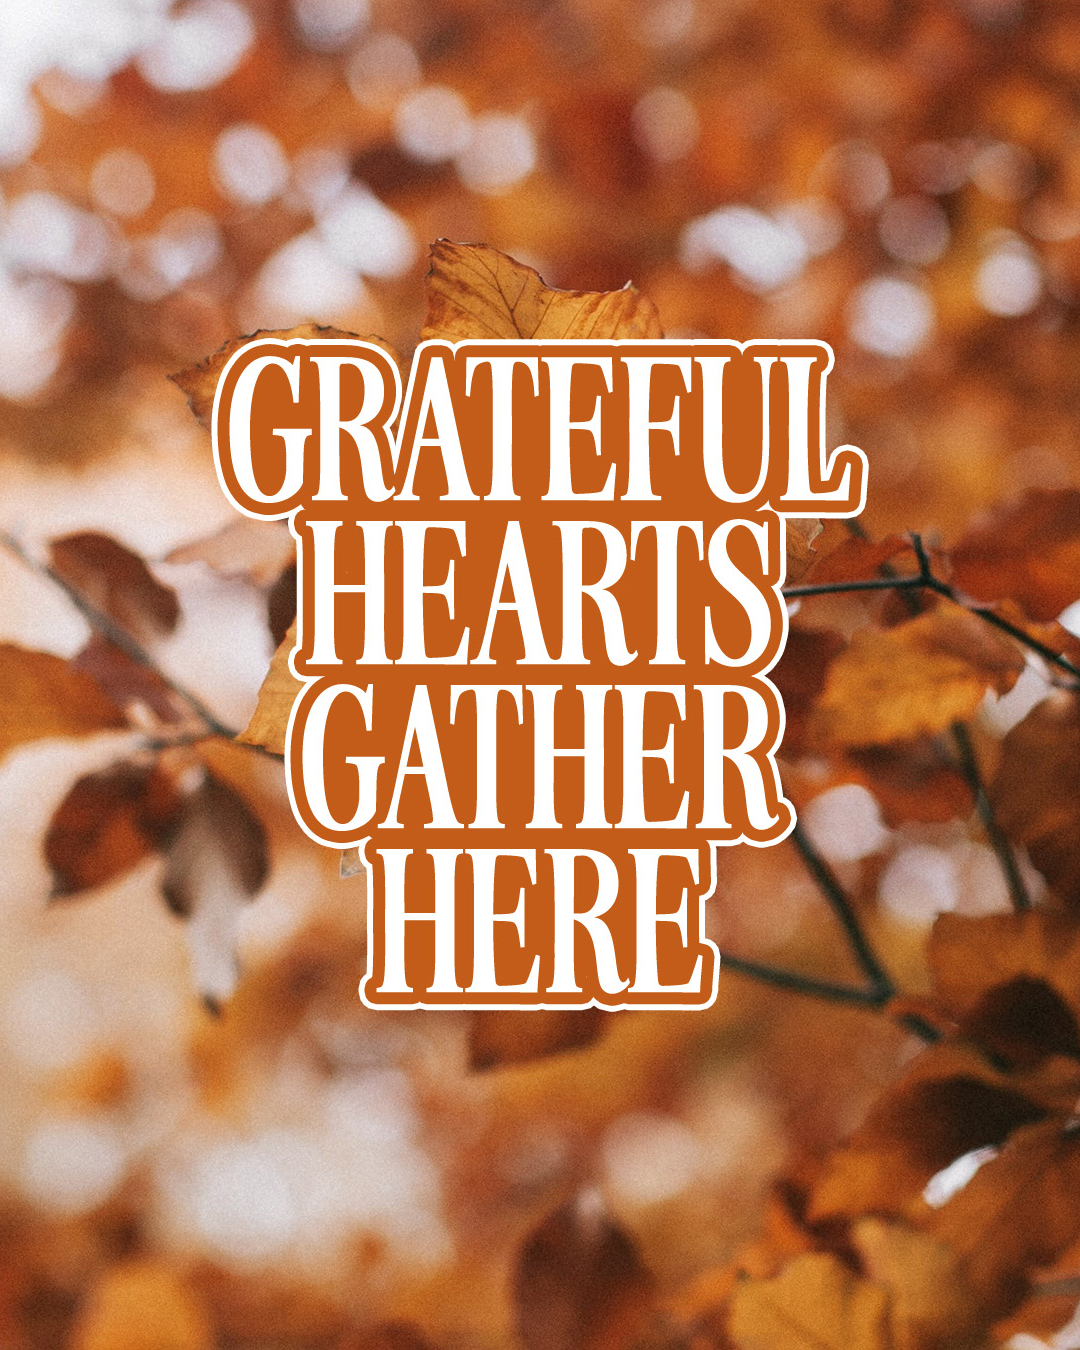 Grateful hearts gather here